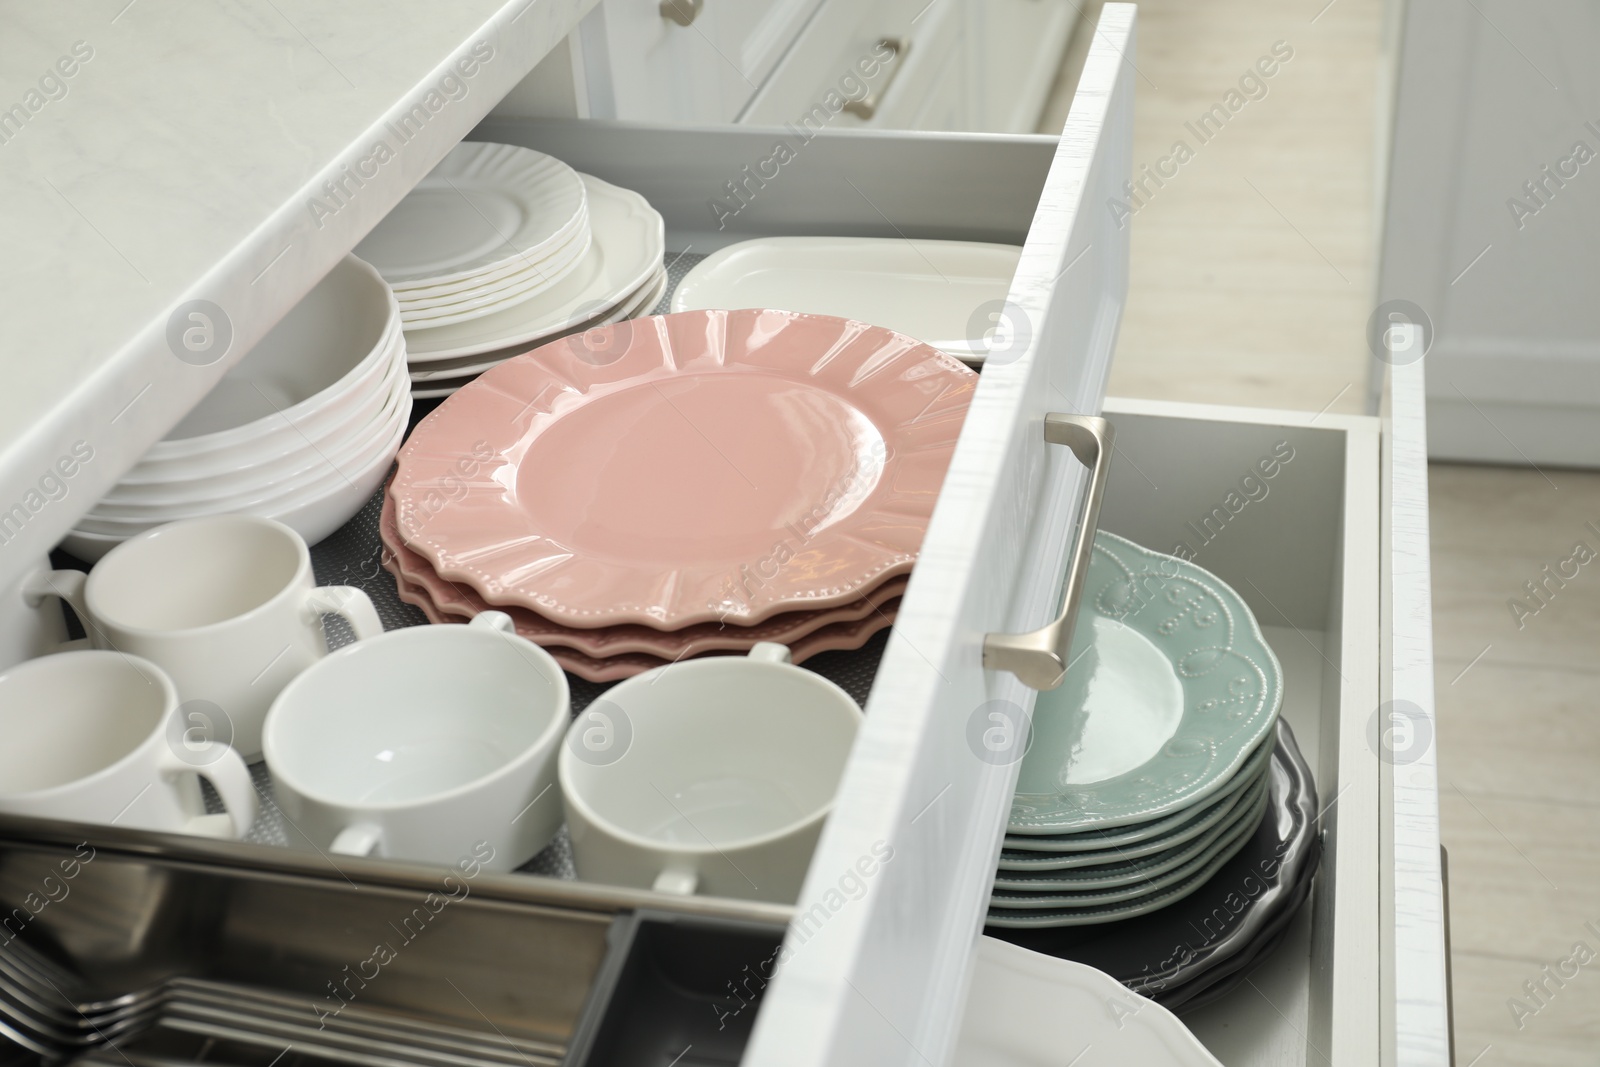 Photo of Clean plates, bowls and cups in drawers indoors